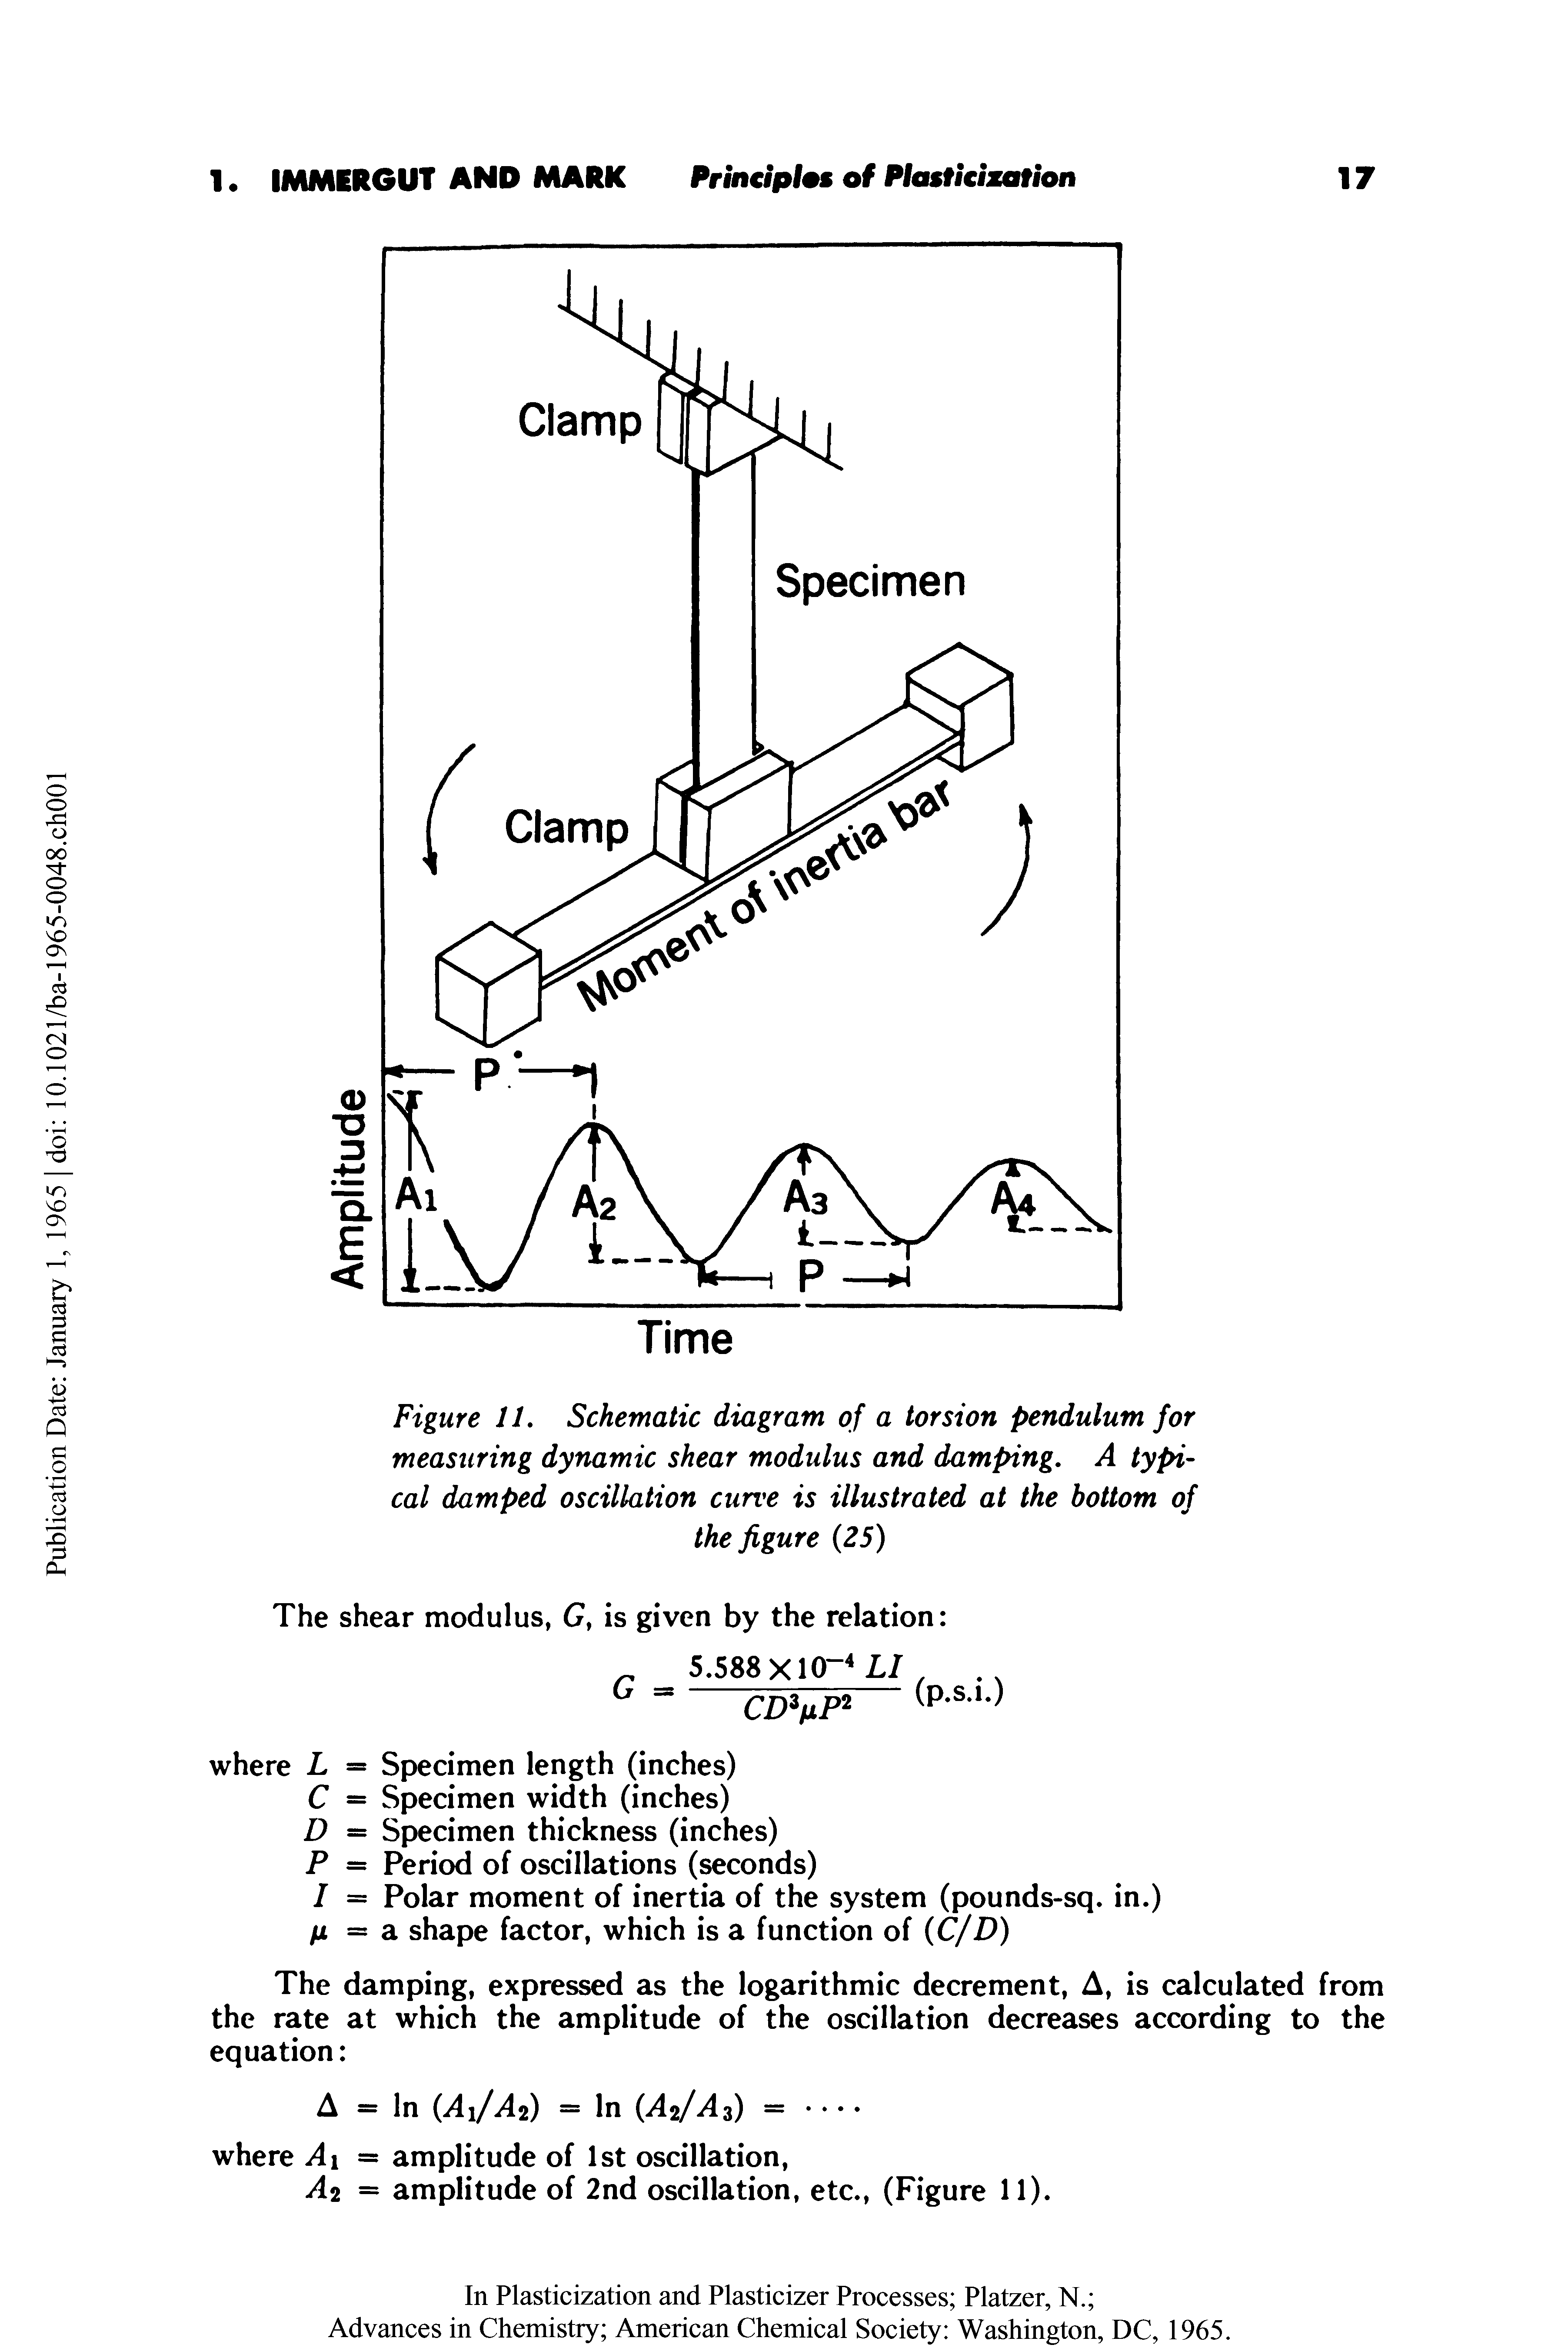 Figure 11. Schematic diagram of a torsion pendulum for measuring dynamic shear modulus and damping. A typical damped oscillation curve is illustrated at the bottom of the figure (25)...